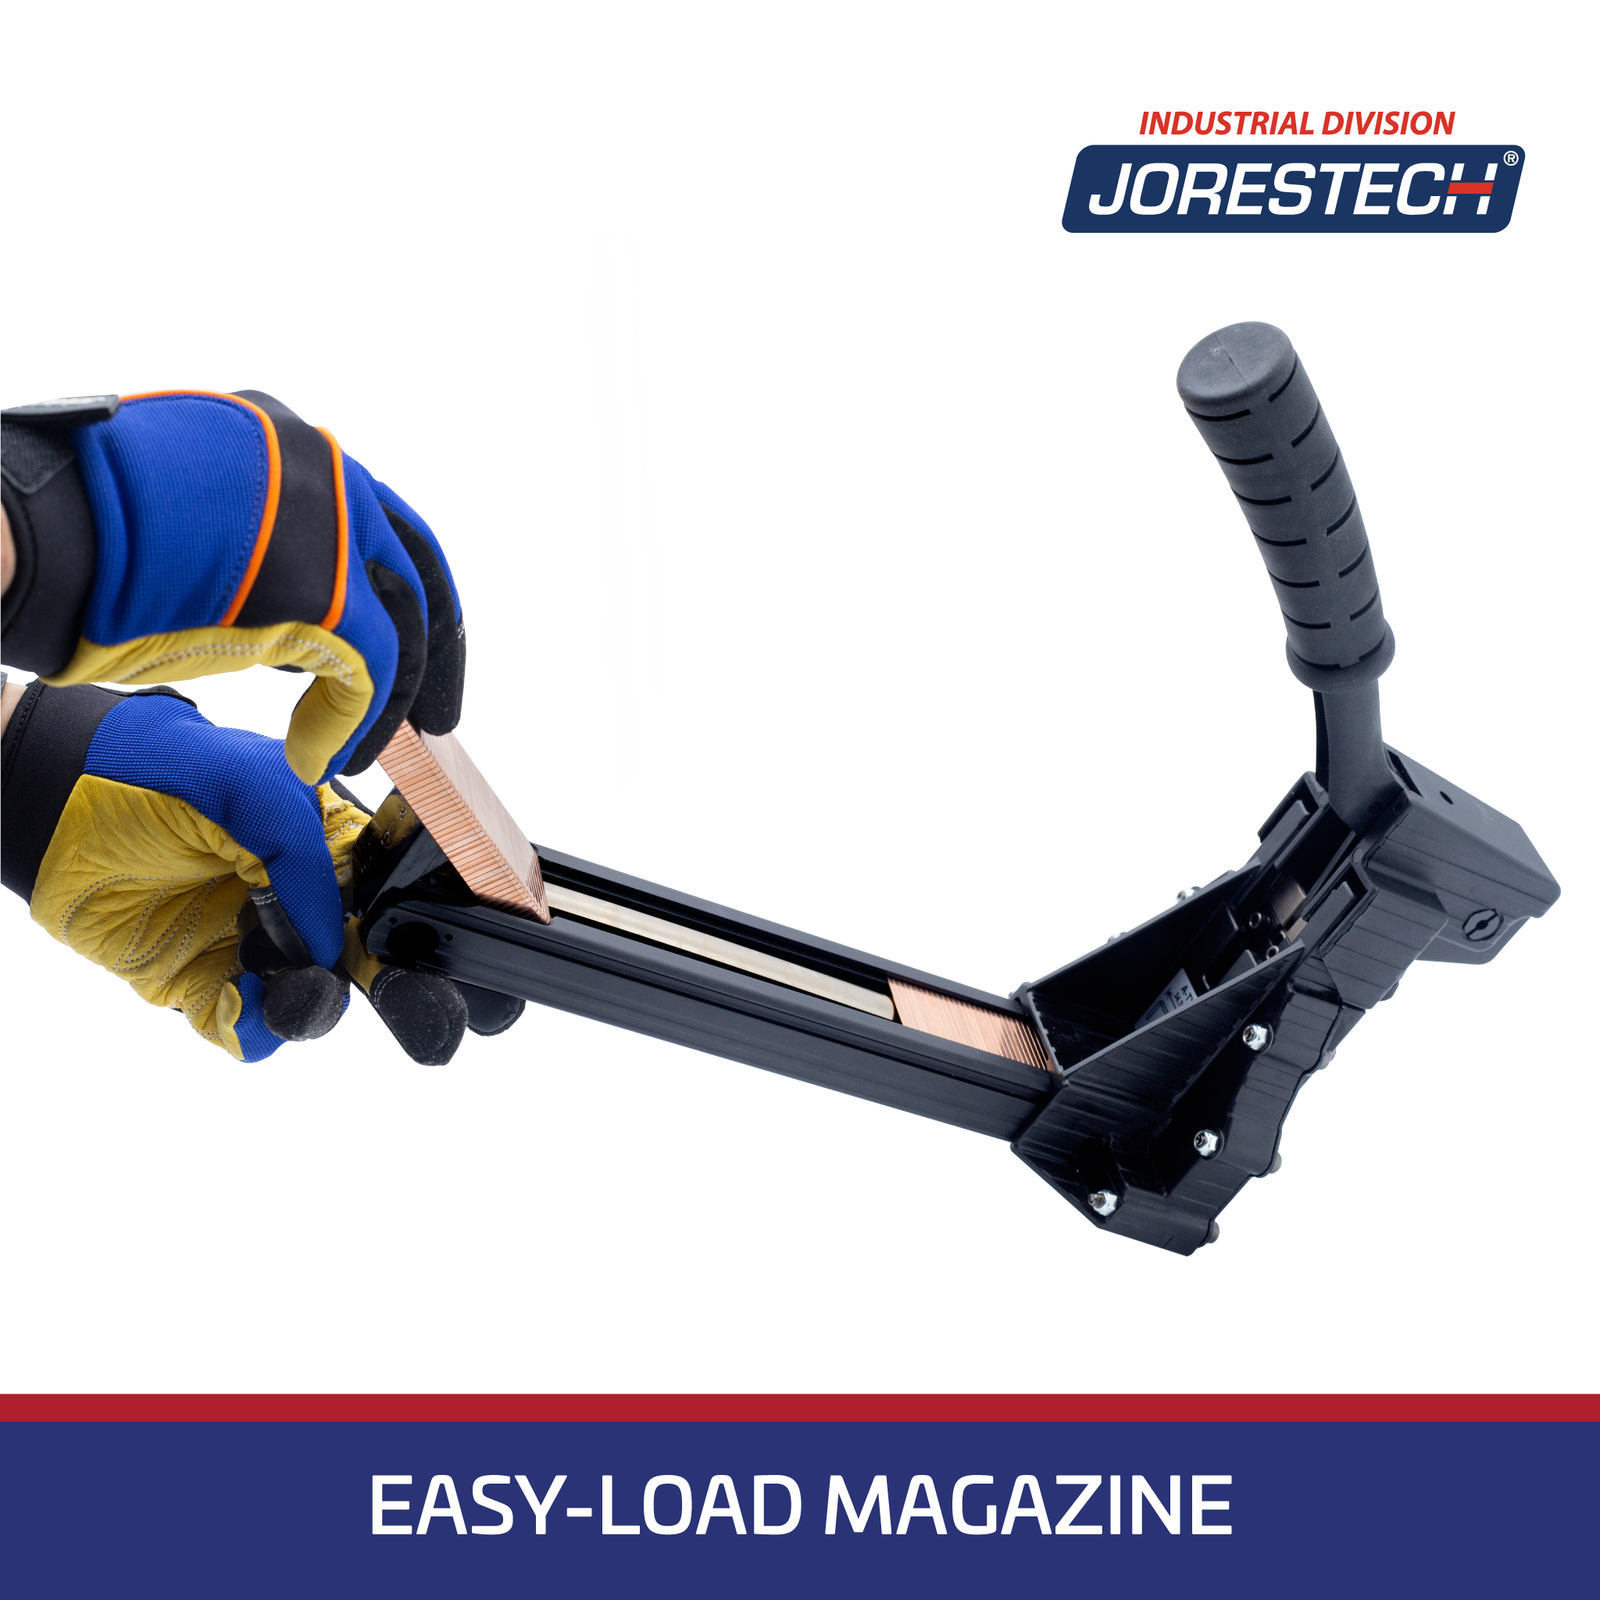 operator wearing blue gloves loading black manual carton stapler with copper colored staples. Blue/red banner reads: easy-load magazine and JORES TECHNOLOGIES® logo